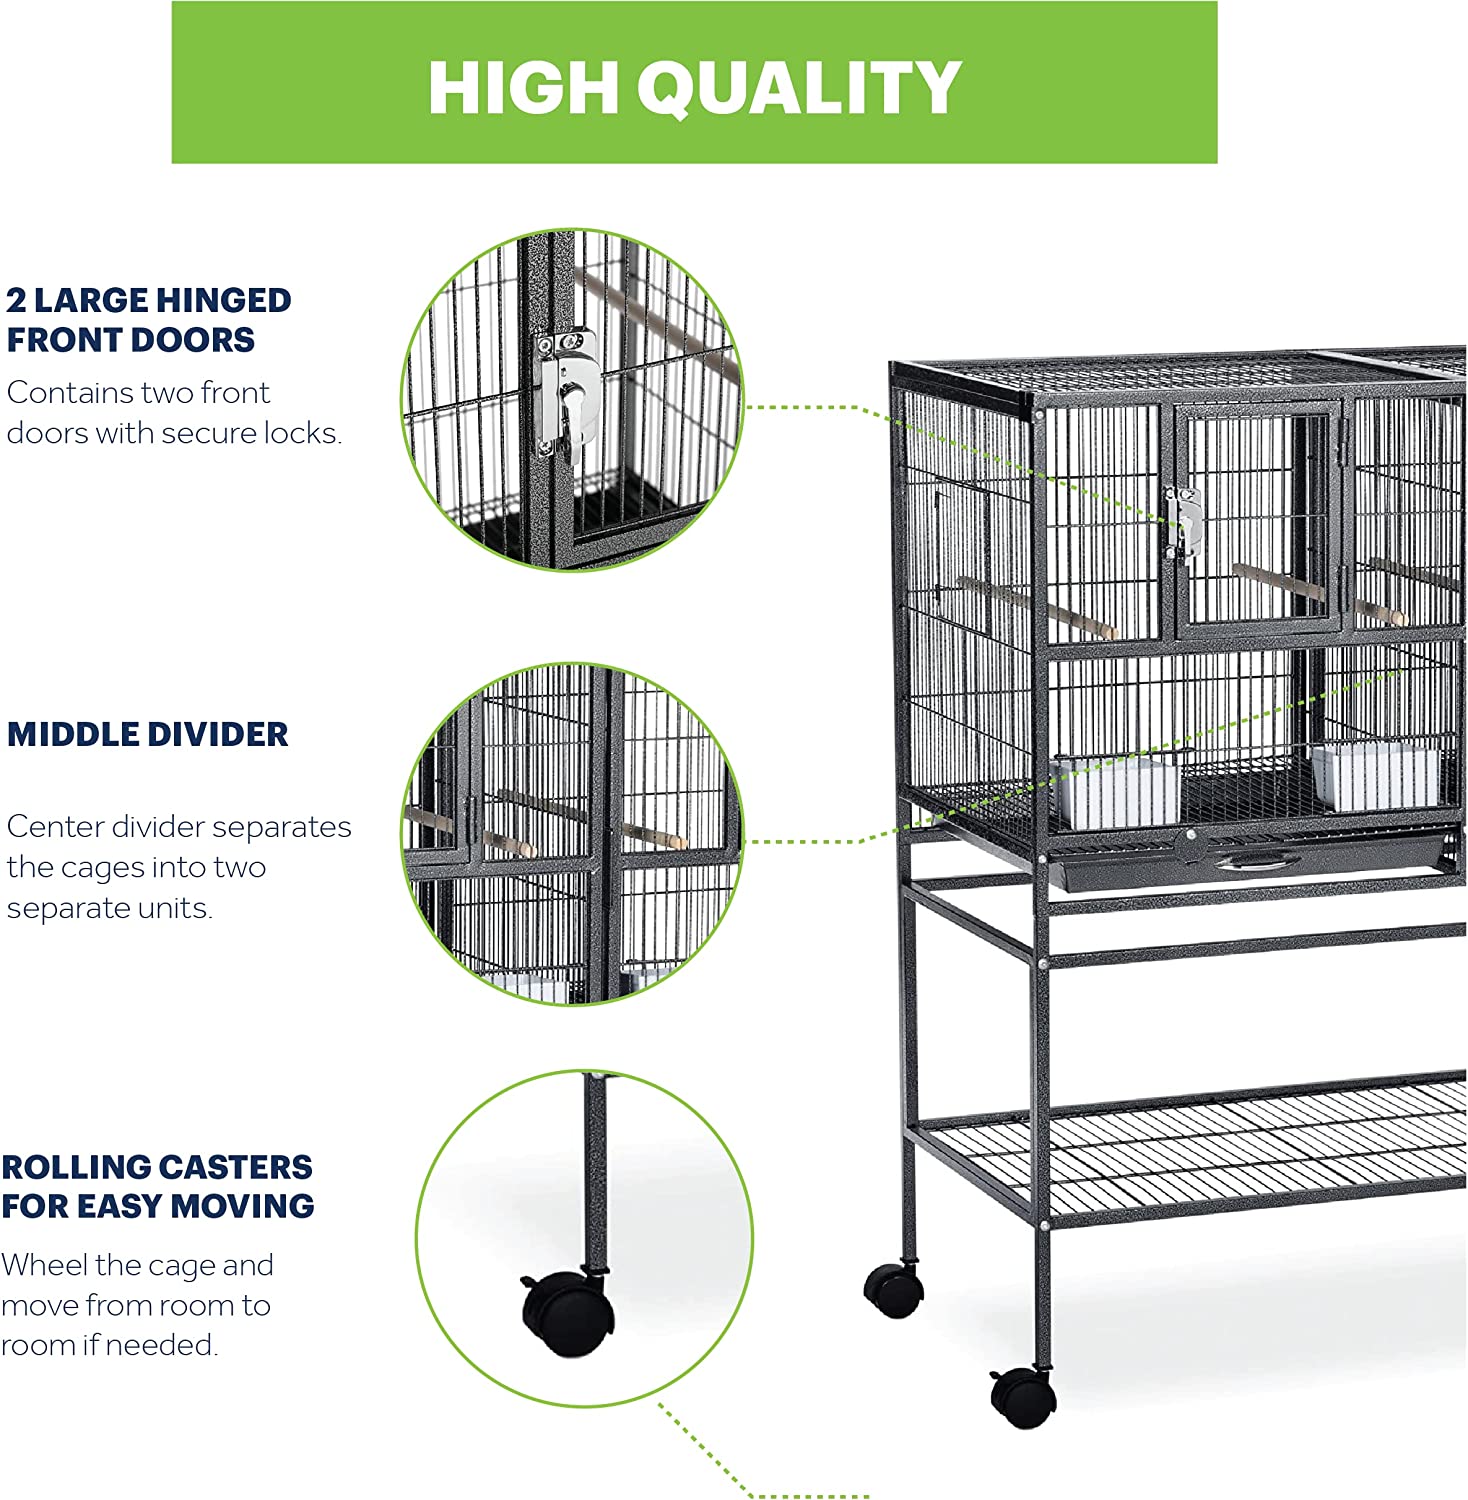 Prevue Pet Products Hampton Deluxe Divided Breeder Bird Cage System with Stand, Stackable Bird Crates for Breeding, Multi-Bird 1 or 2 Cage System, Black Hammertone Finish